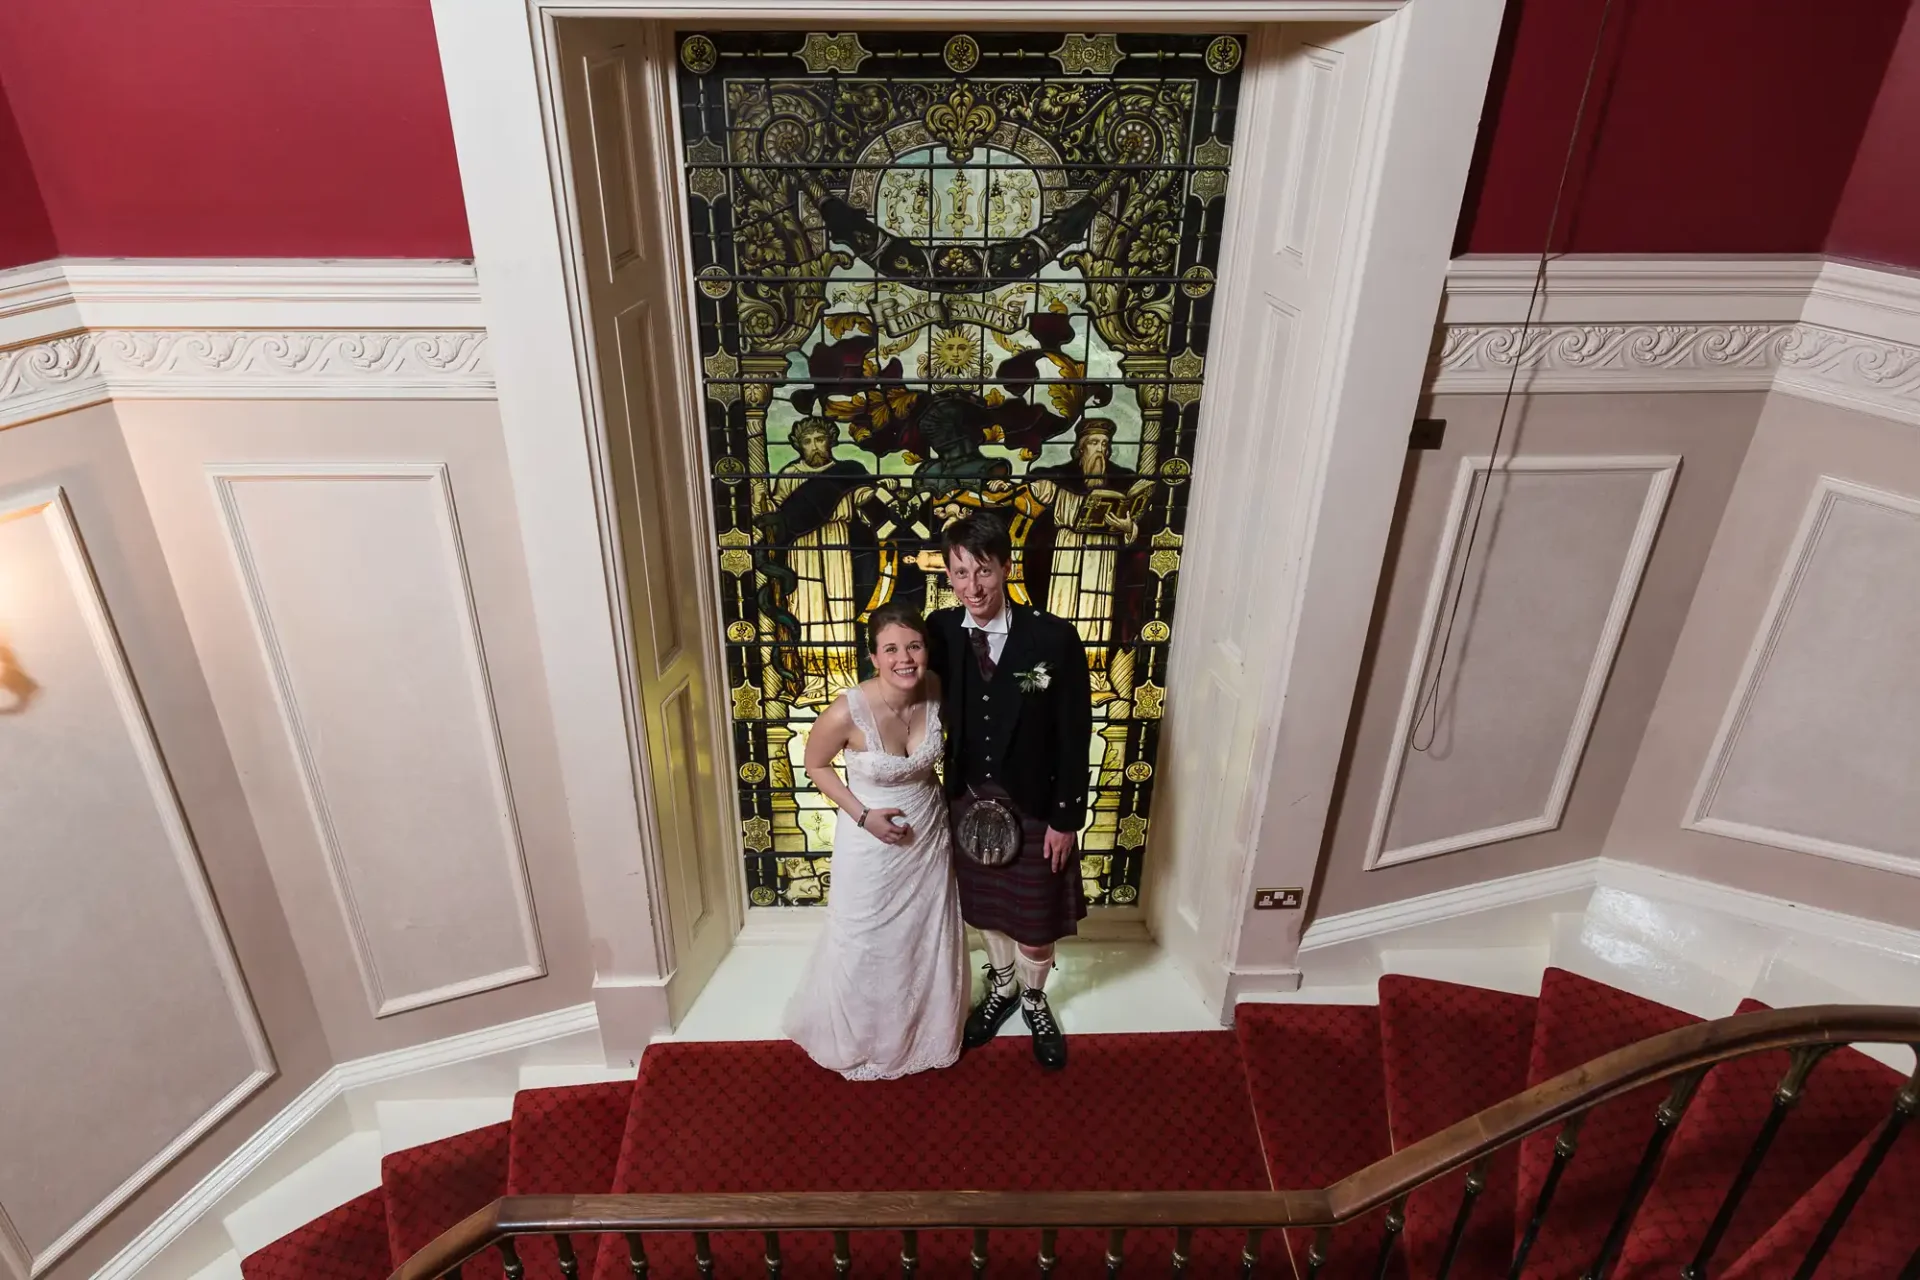 A bride in a white dress and a groom in a kilt standing on a staircase in front of a large, ornate stained glass window.